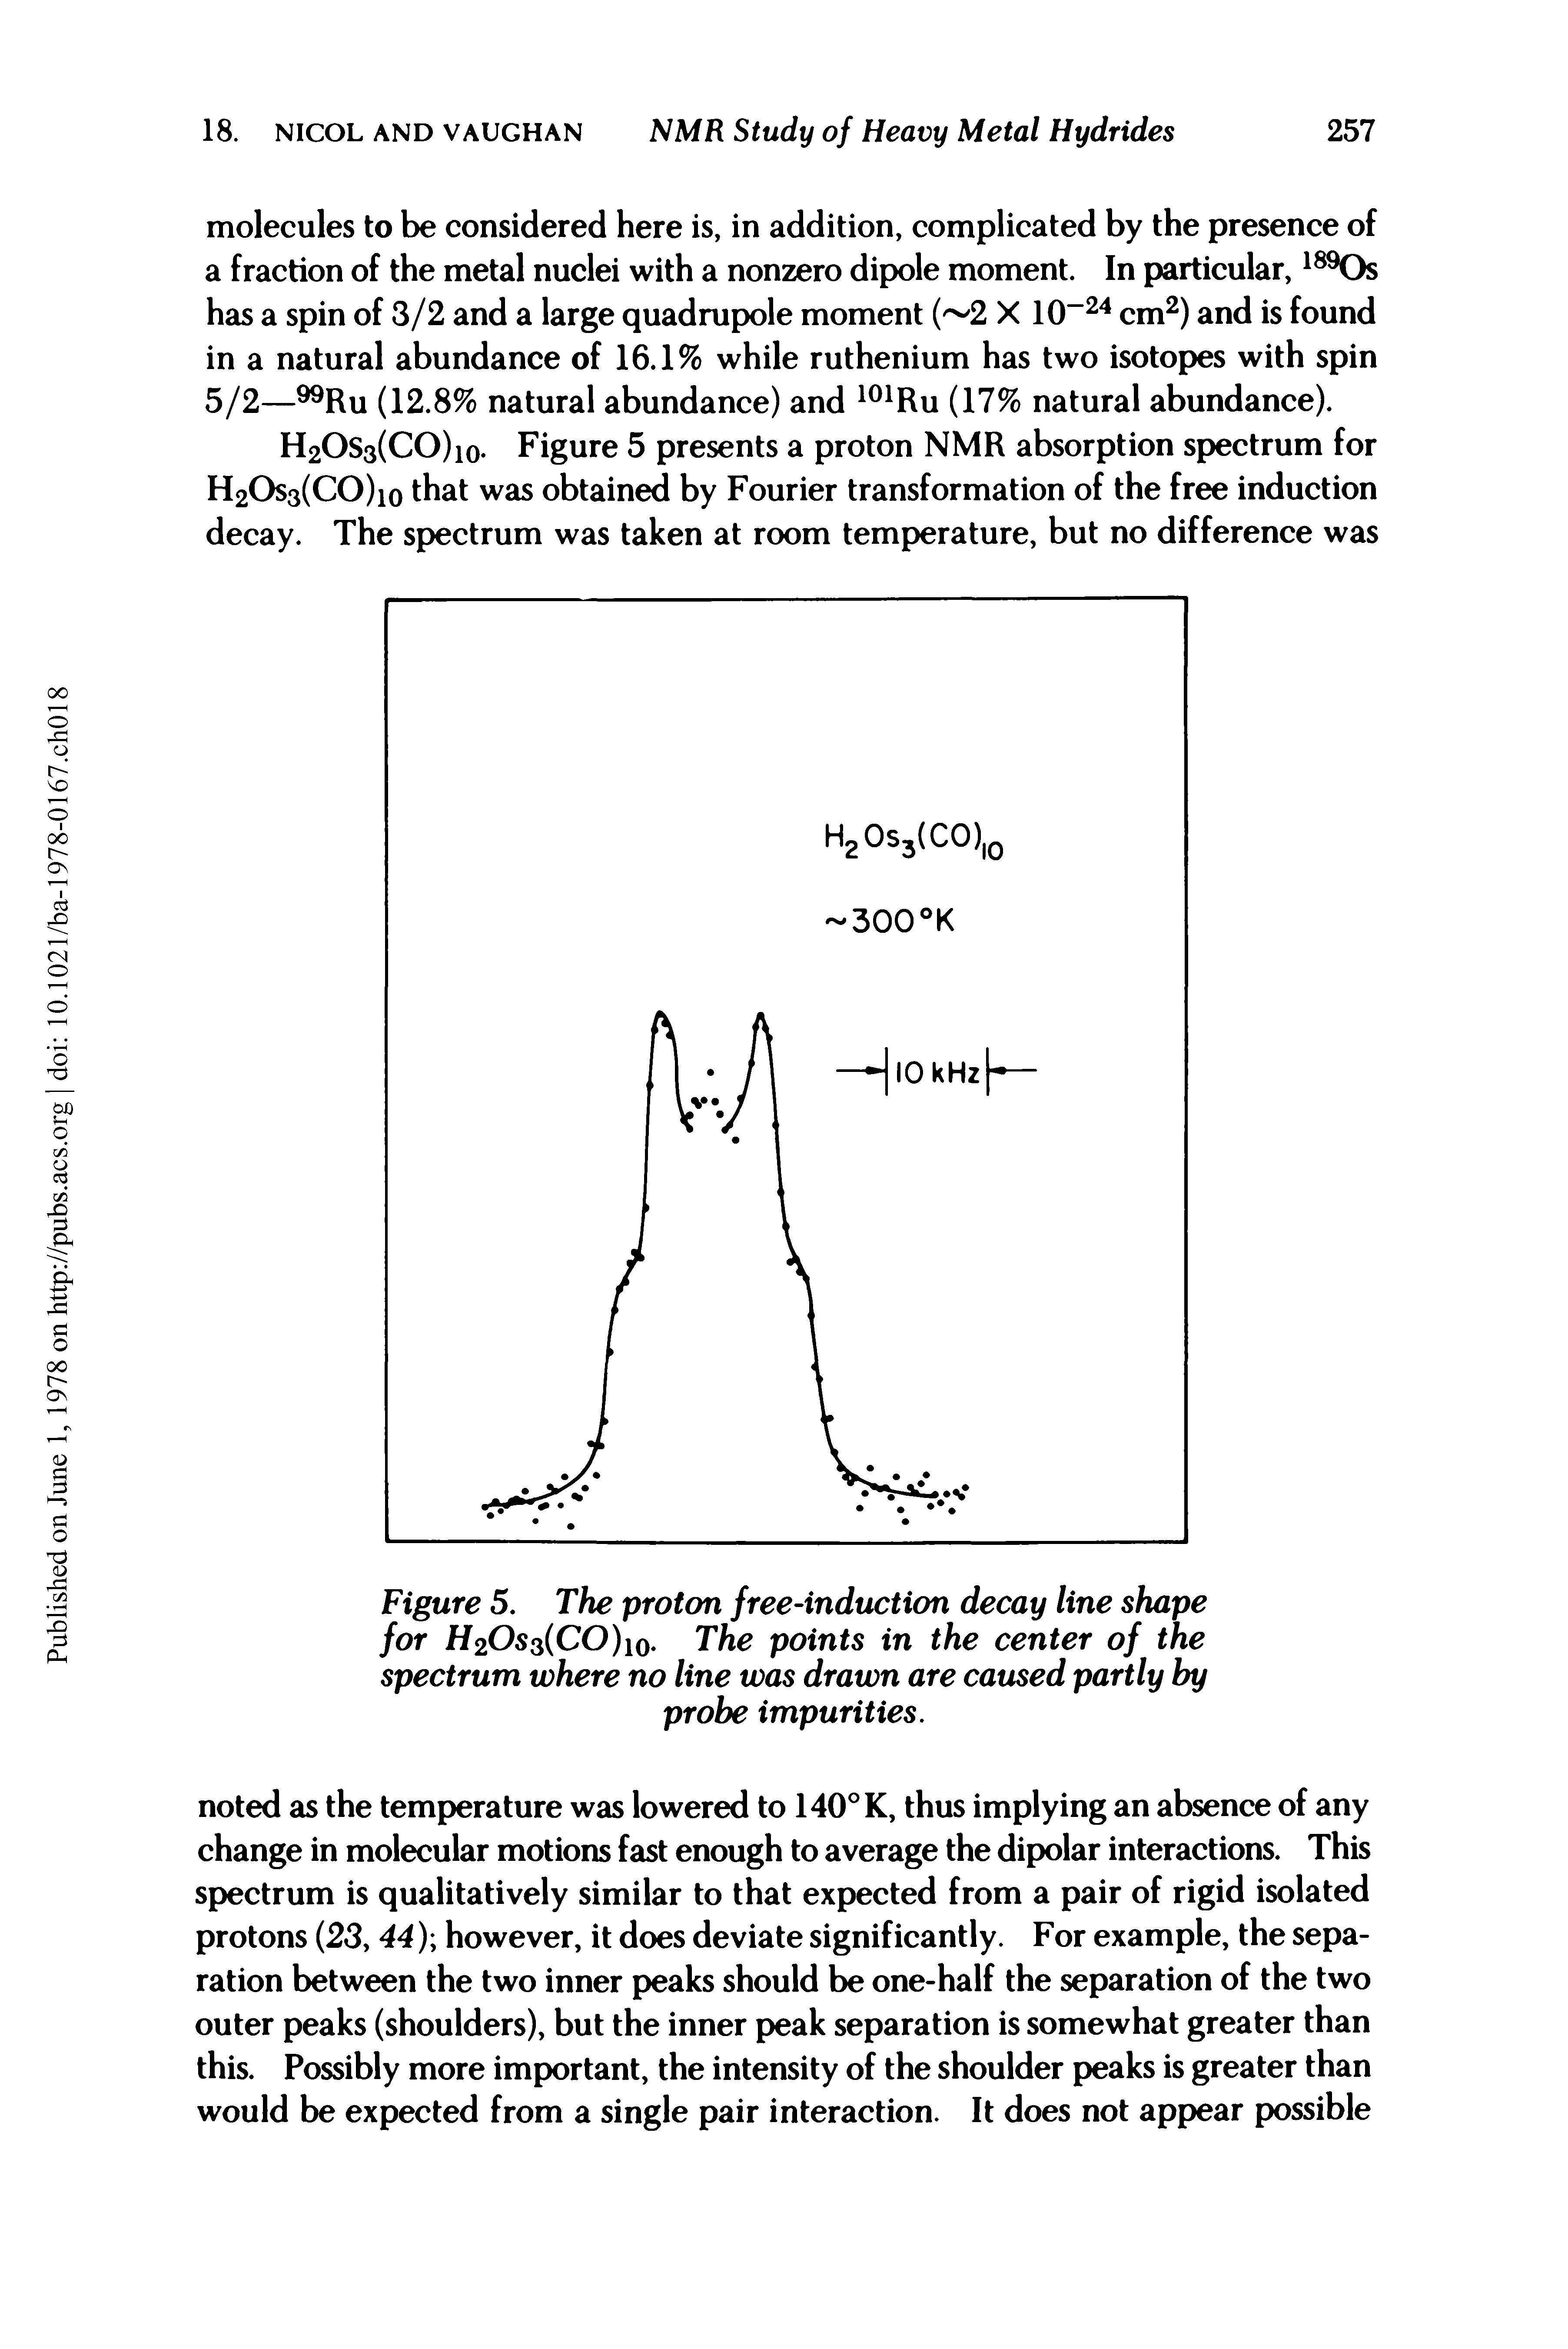 Figure 5. The proton free-induction decay line shape for H2Os3(CO)i0. The points in the center of the spectrum where no line was drawn are caused partly by probe impurities.